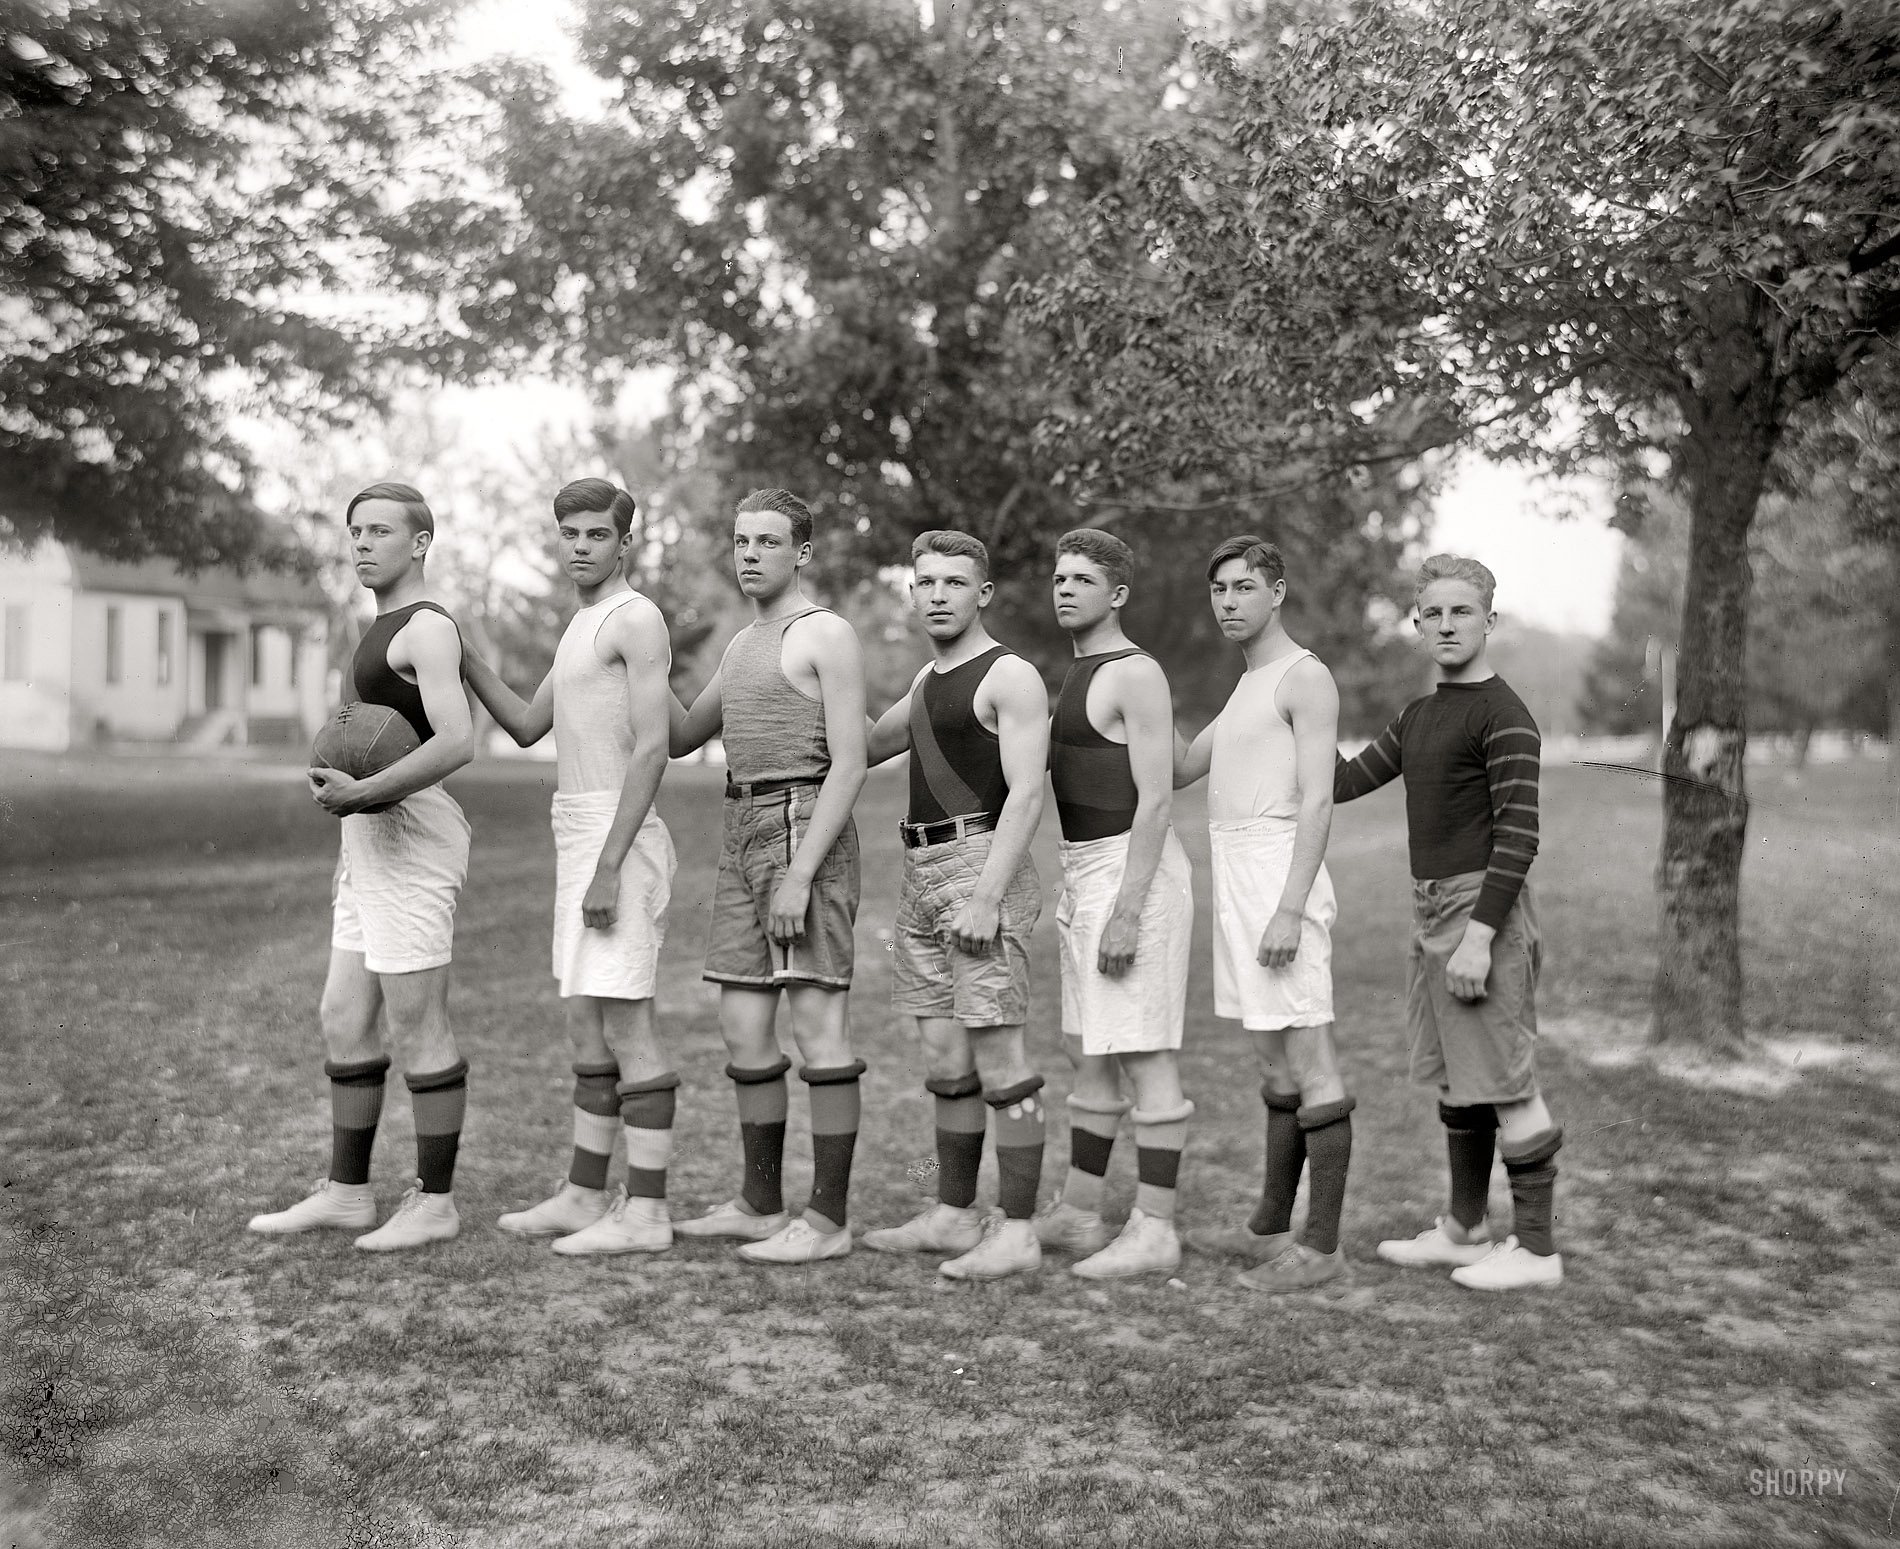 St. Mary's County, Maryland, circa 1920. "Charlotte Hall Military Academy basketball." Harris & Ewing Collection glass negative. View full size.